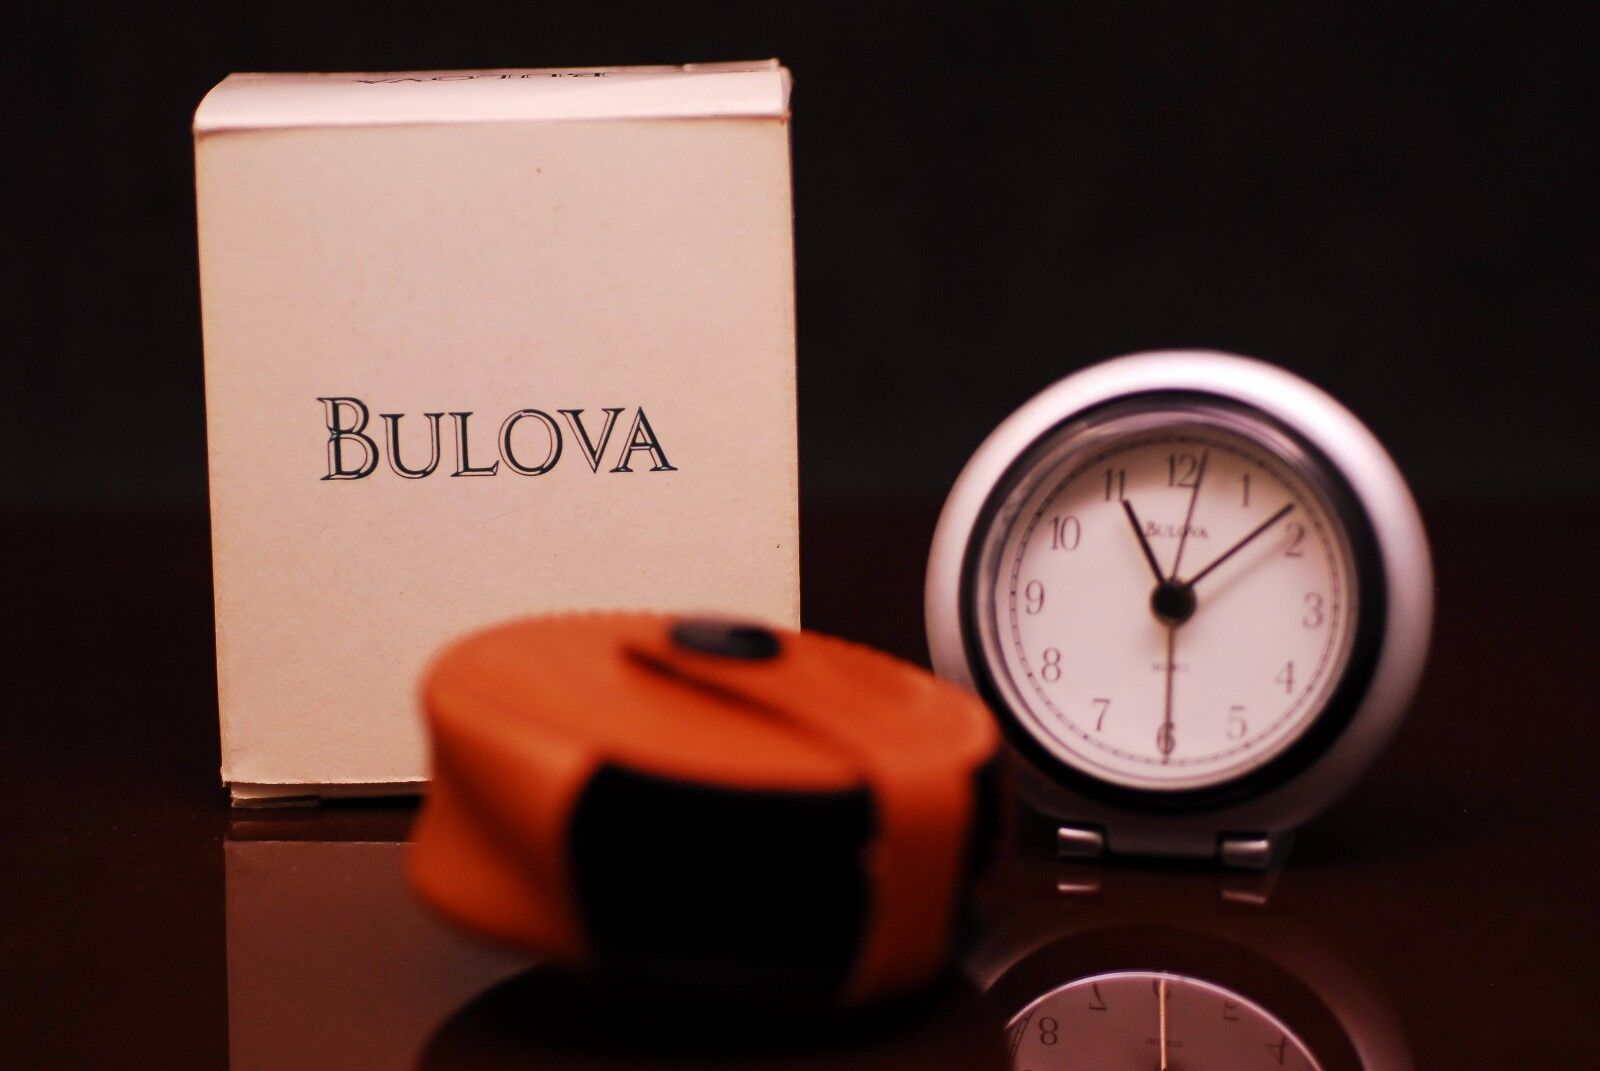 Bulova Travel Alarm Clock B6639 Leather Cover Box/Papers Easy-To-Use Loud Beep 